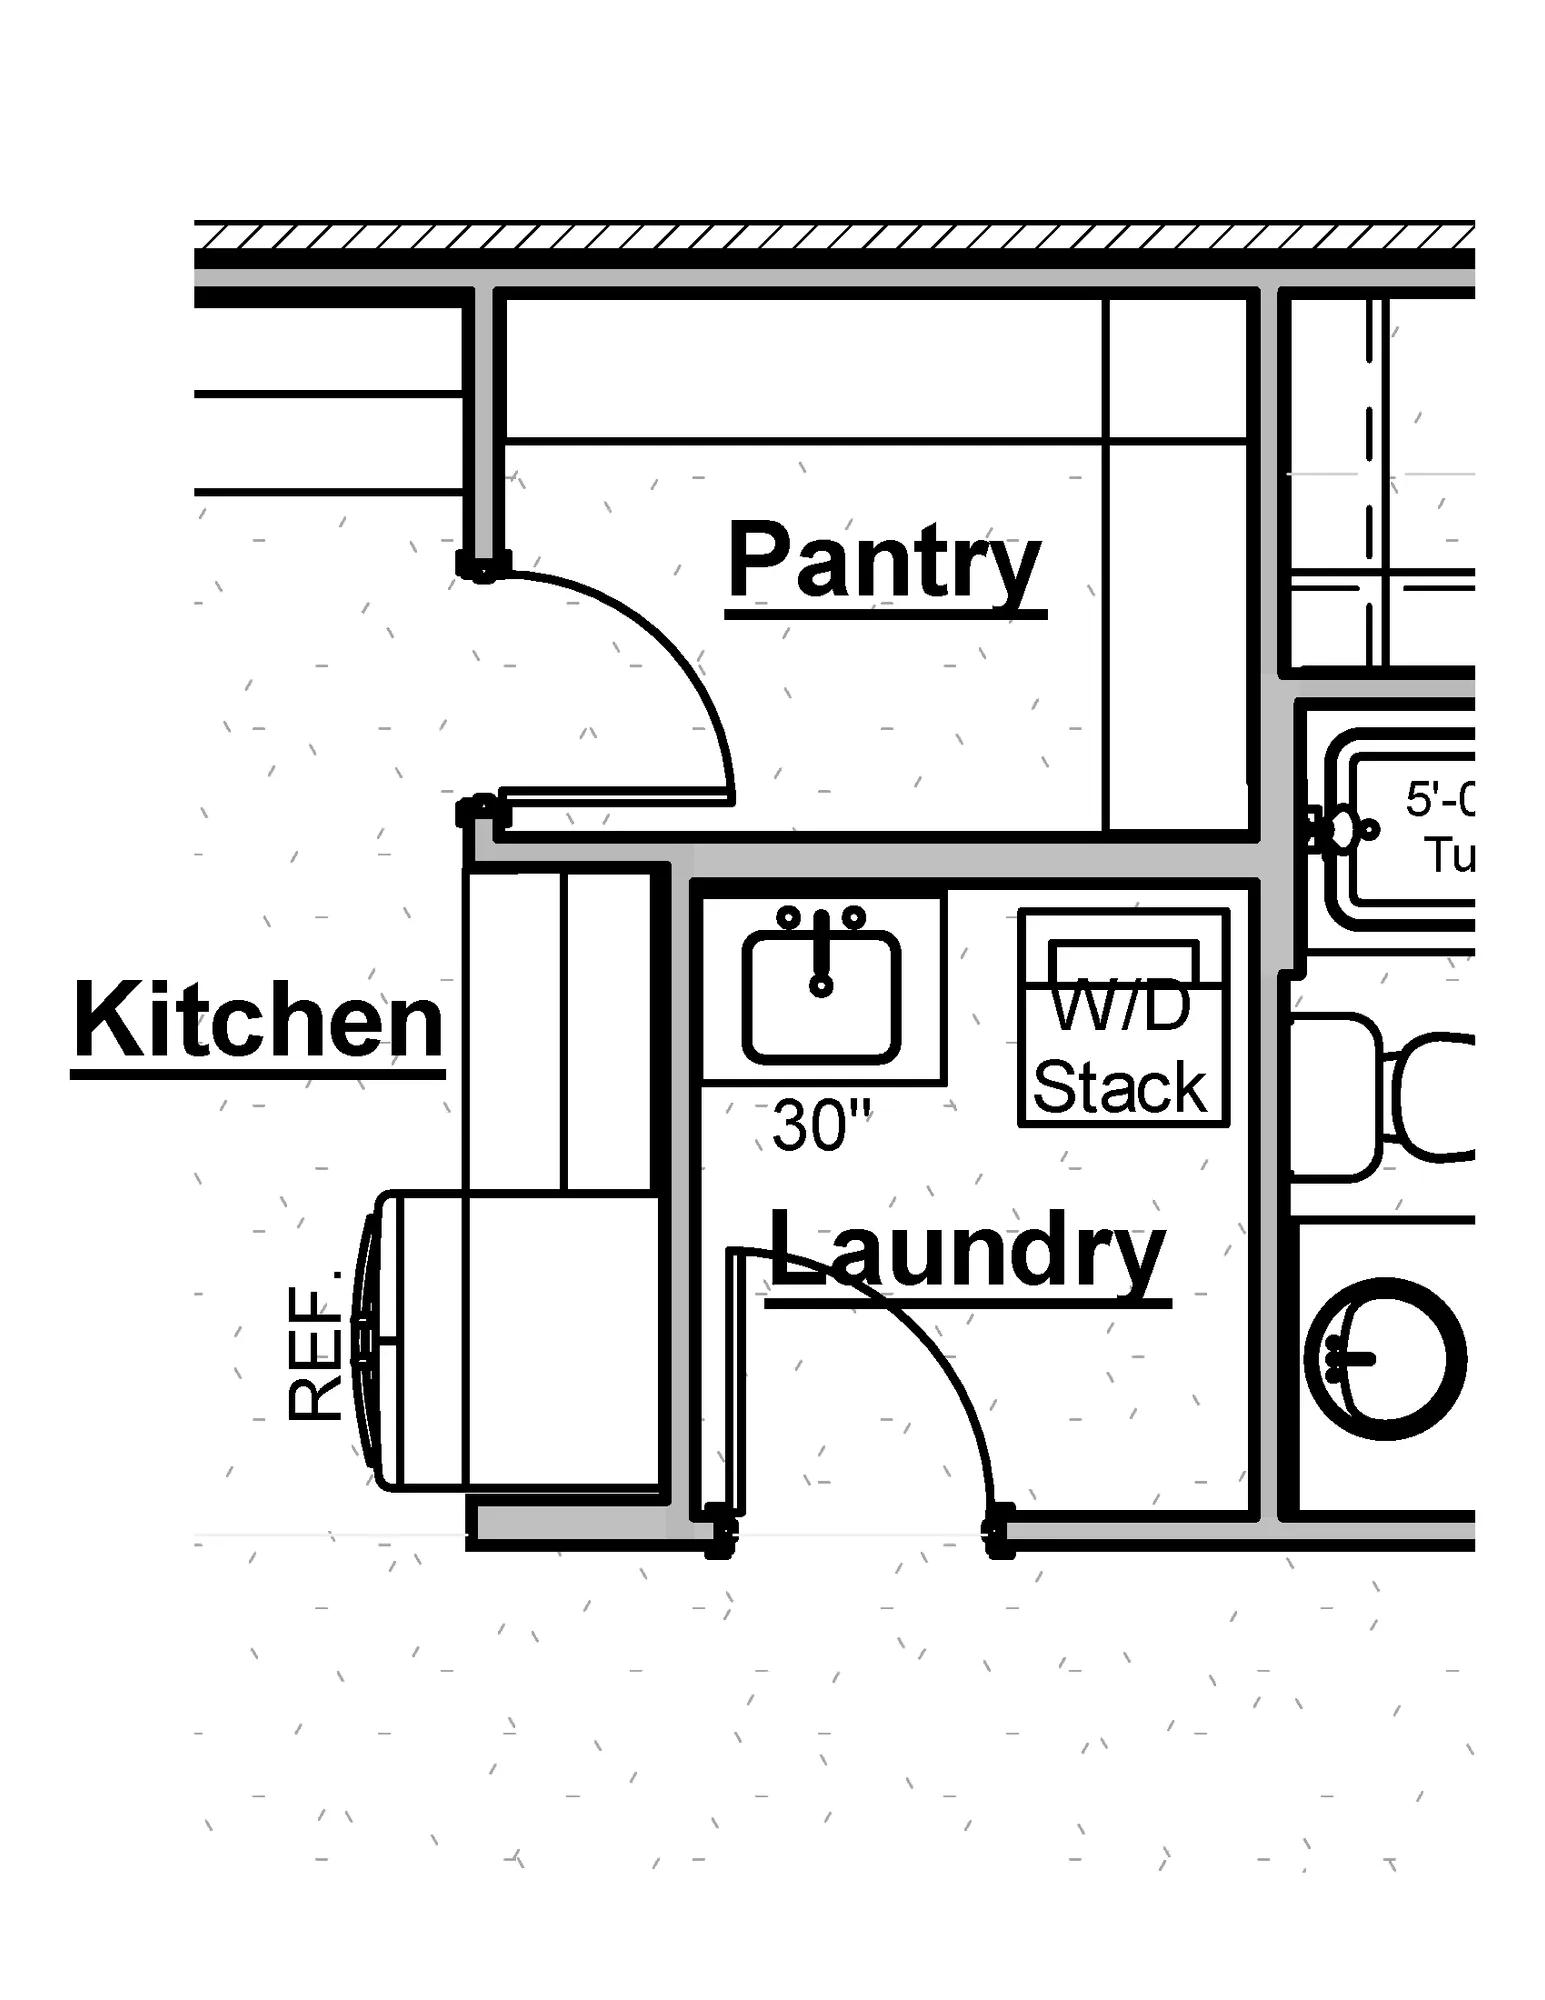 Laundry Sink with Washer Dryer Stack - undefined